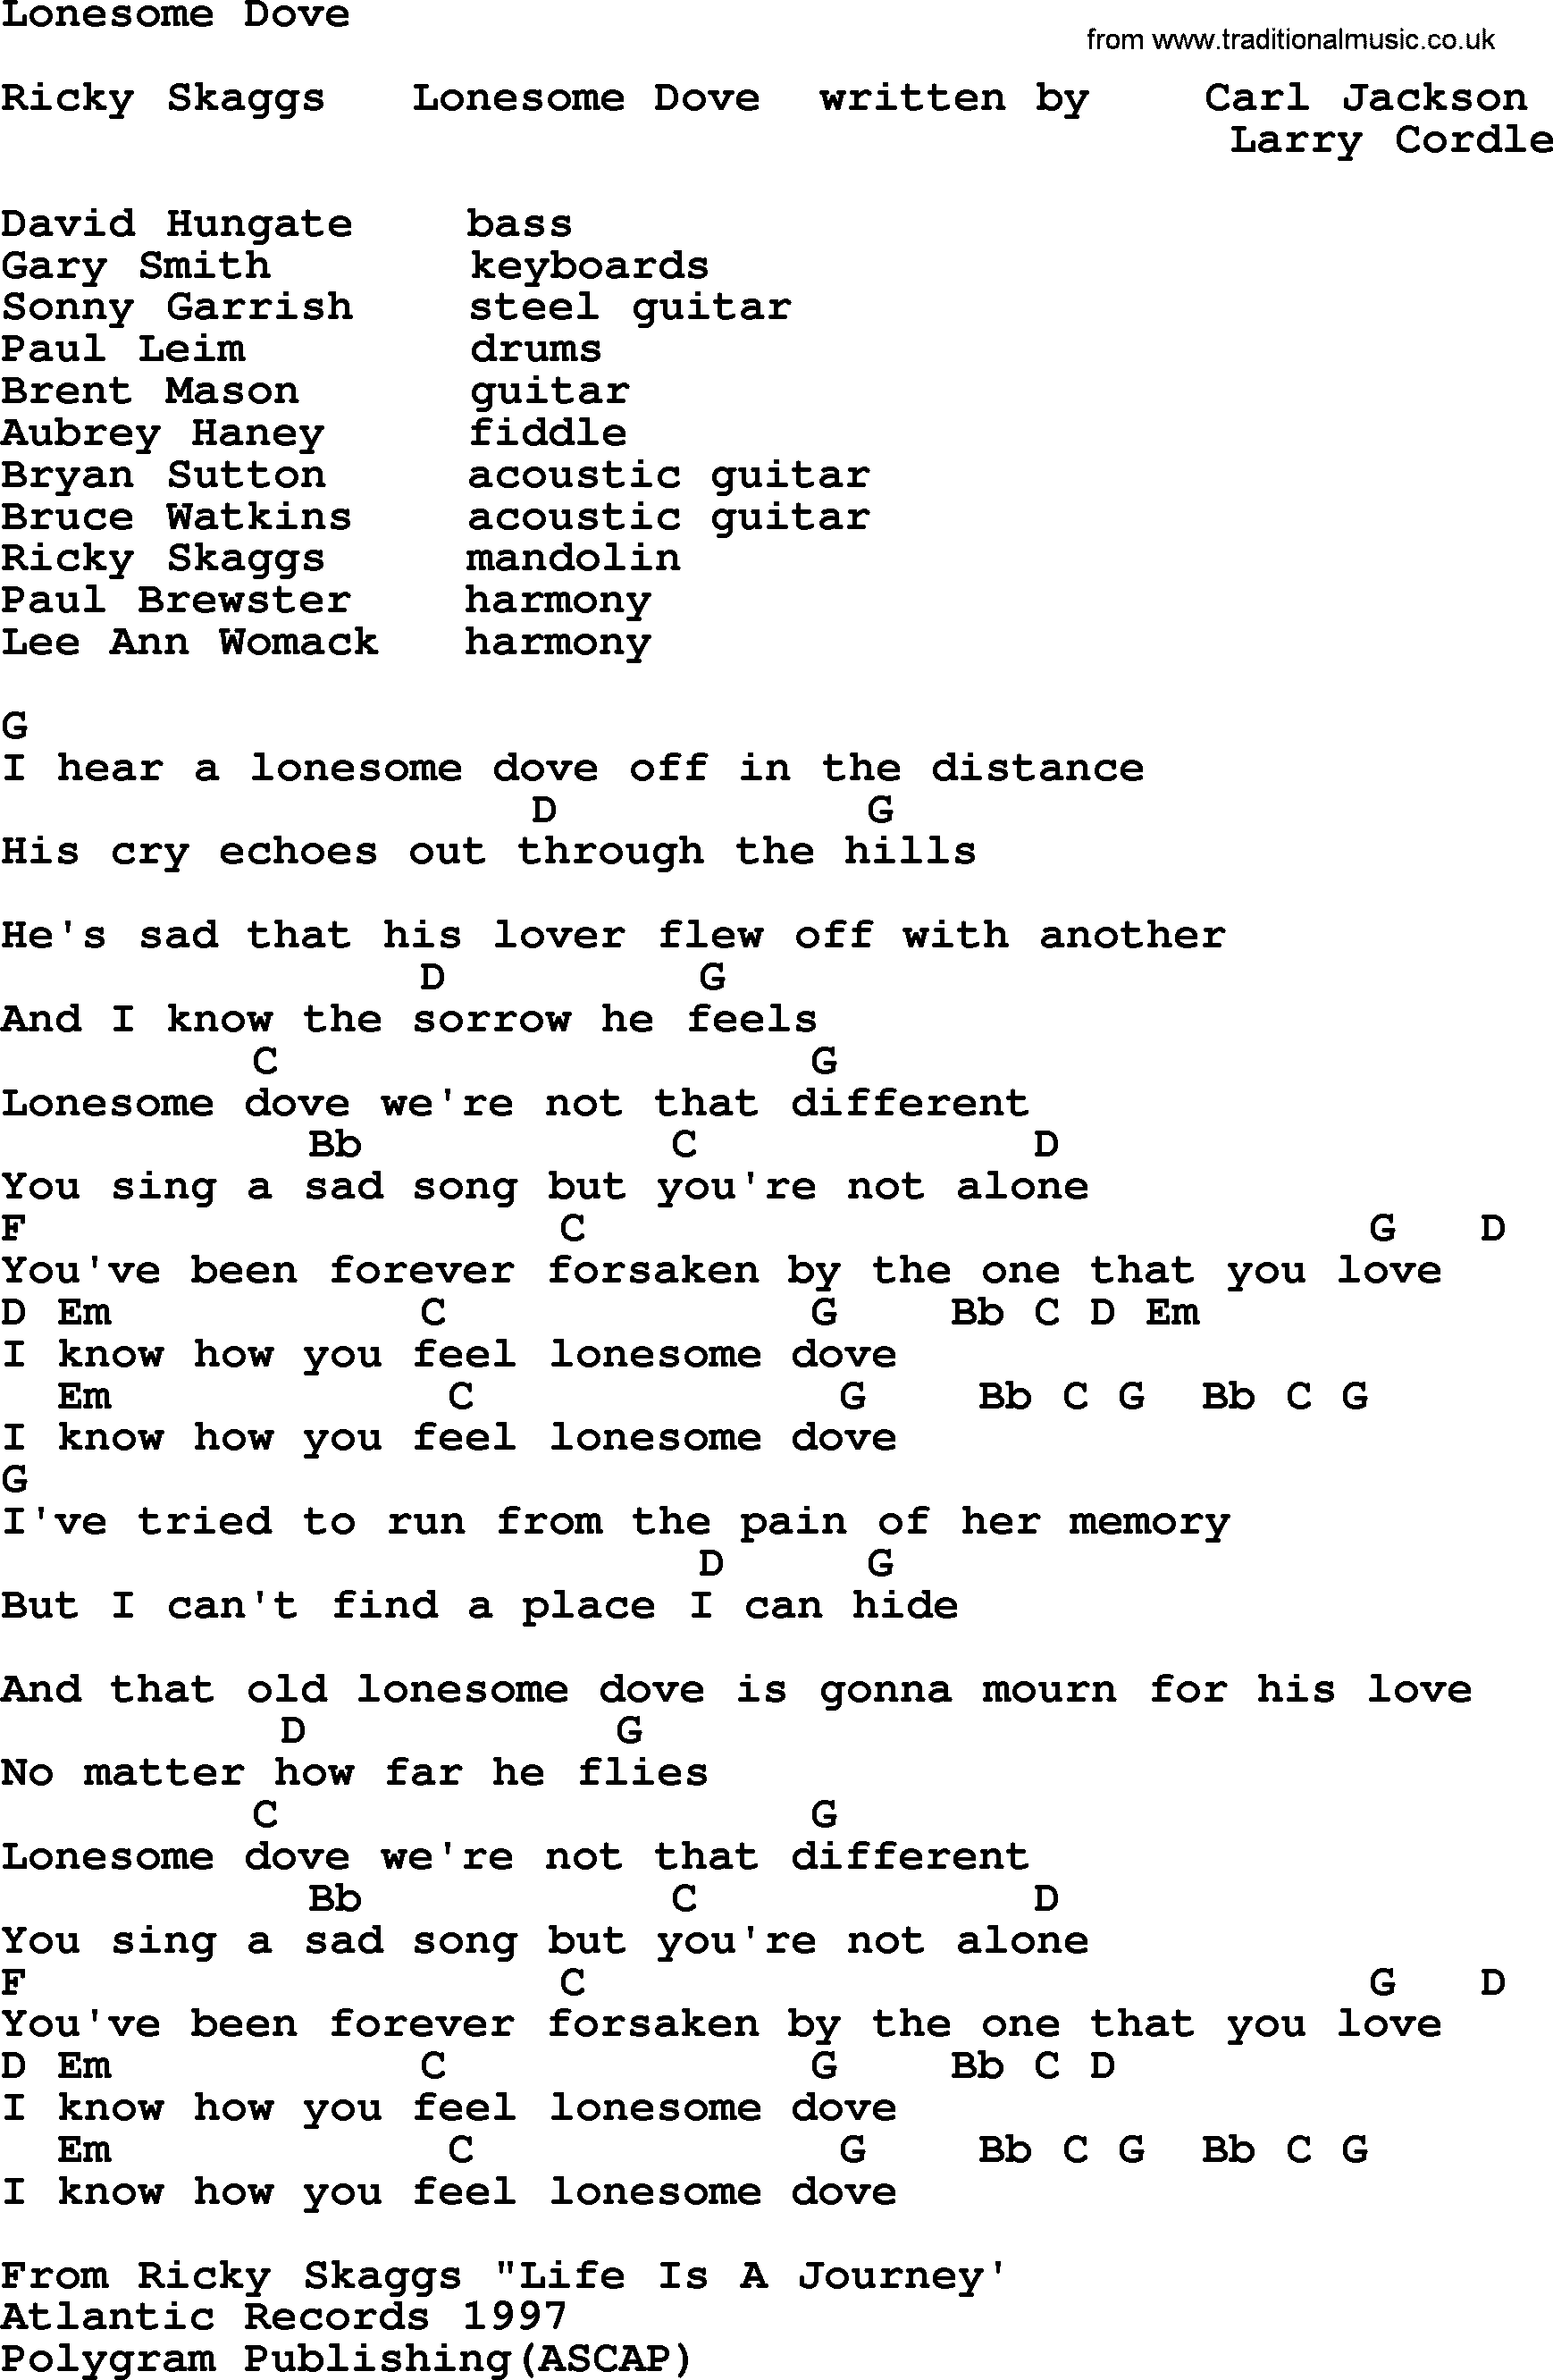 Bluegrass song: Lonesome Dove, lyrics and chords